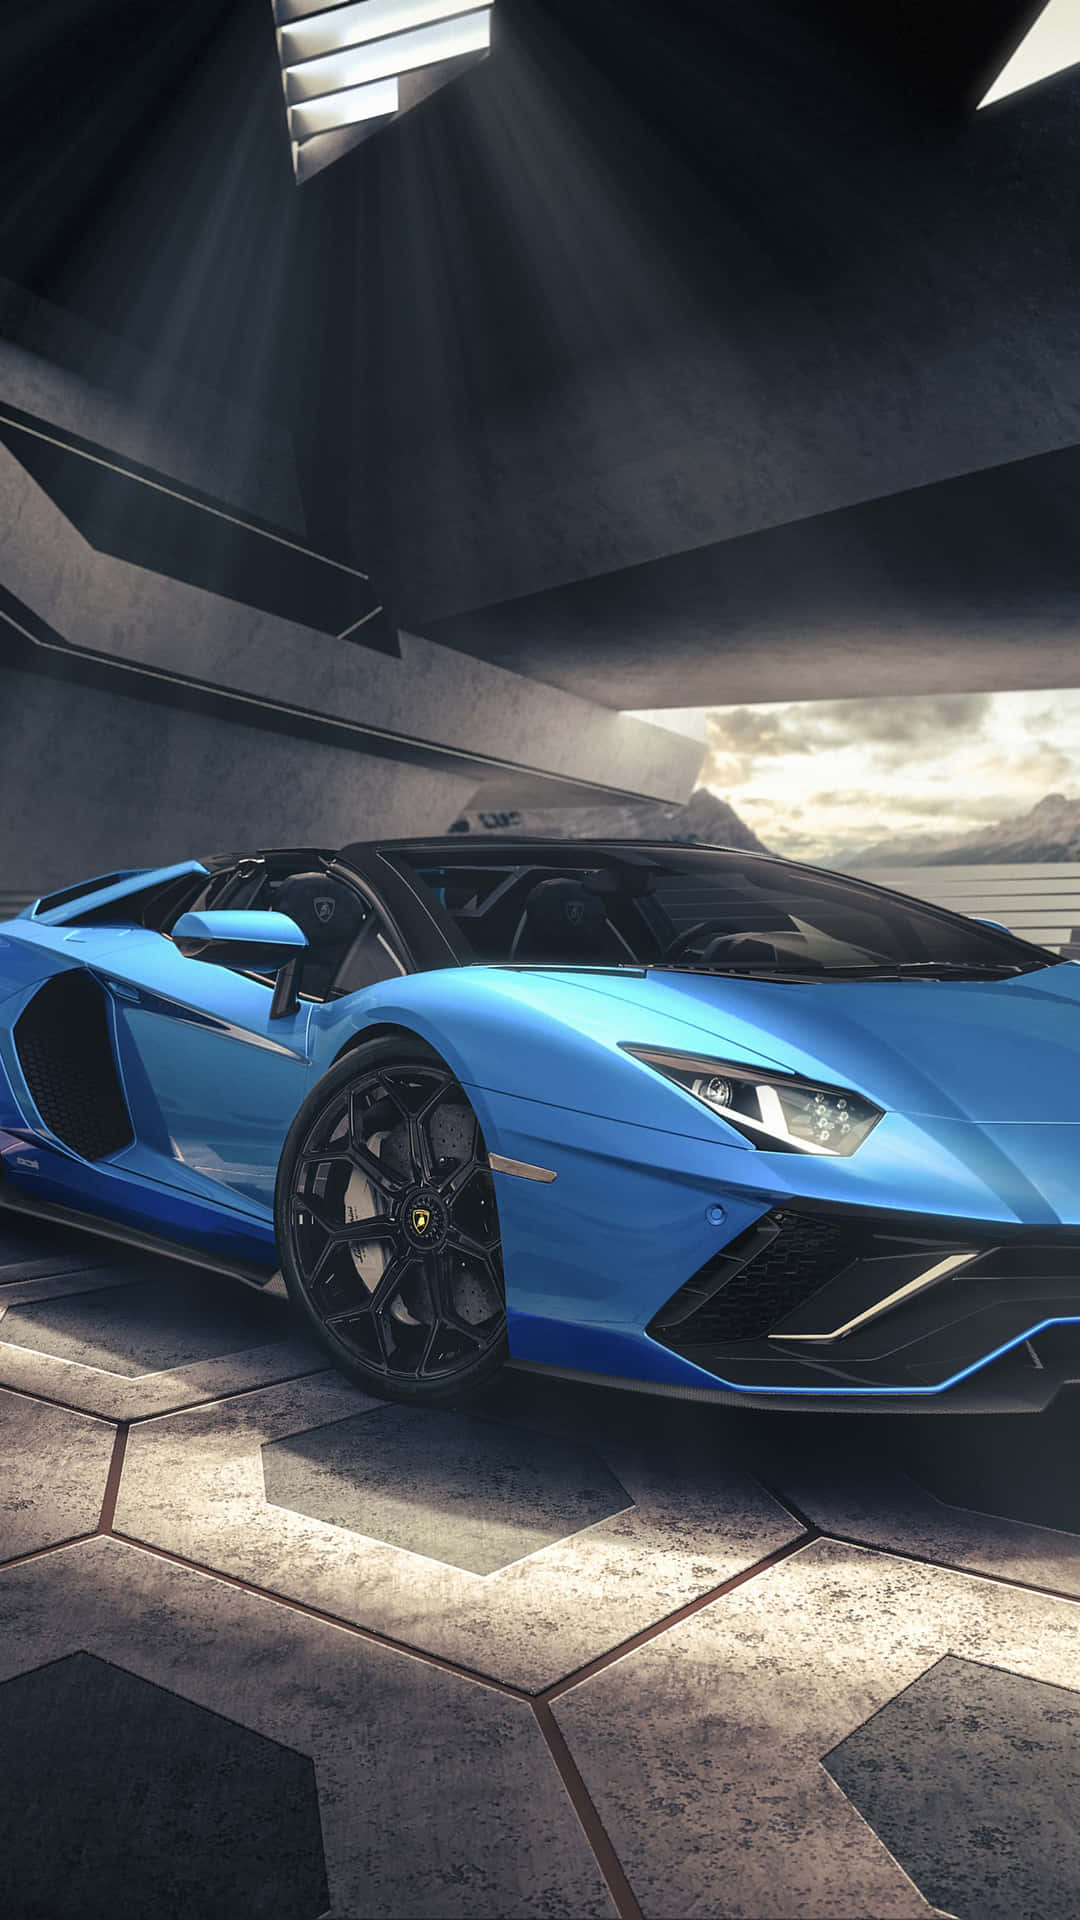 Conquer the City with Luxury and Style in This Blue Lamborghini Iphone Wallpaper